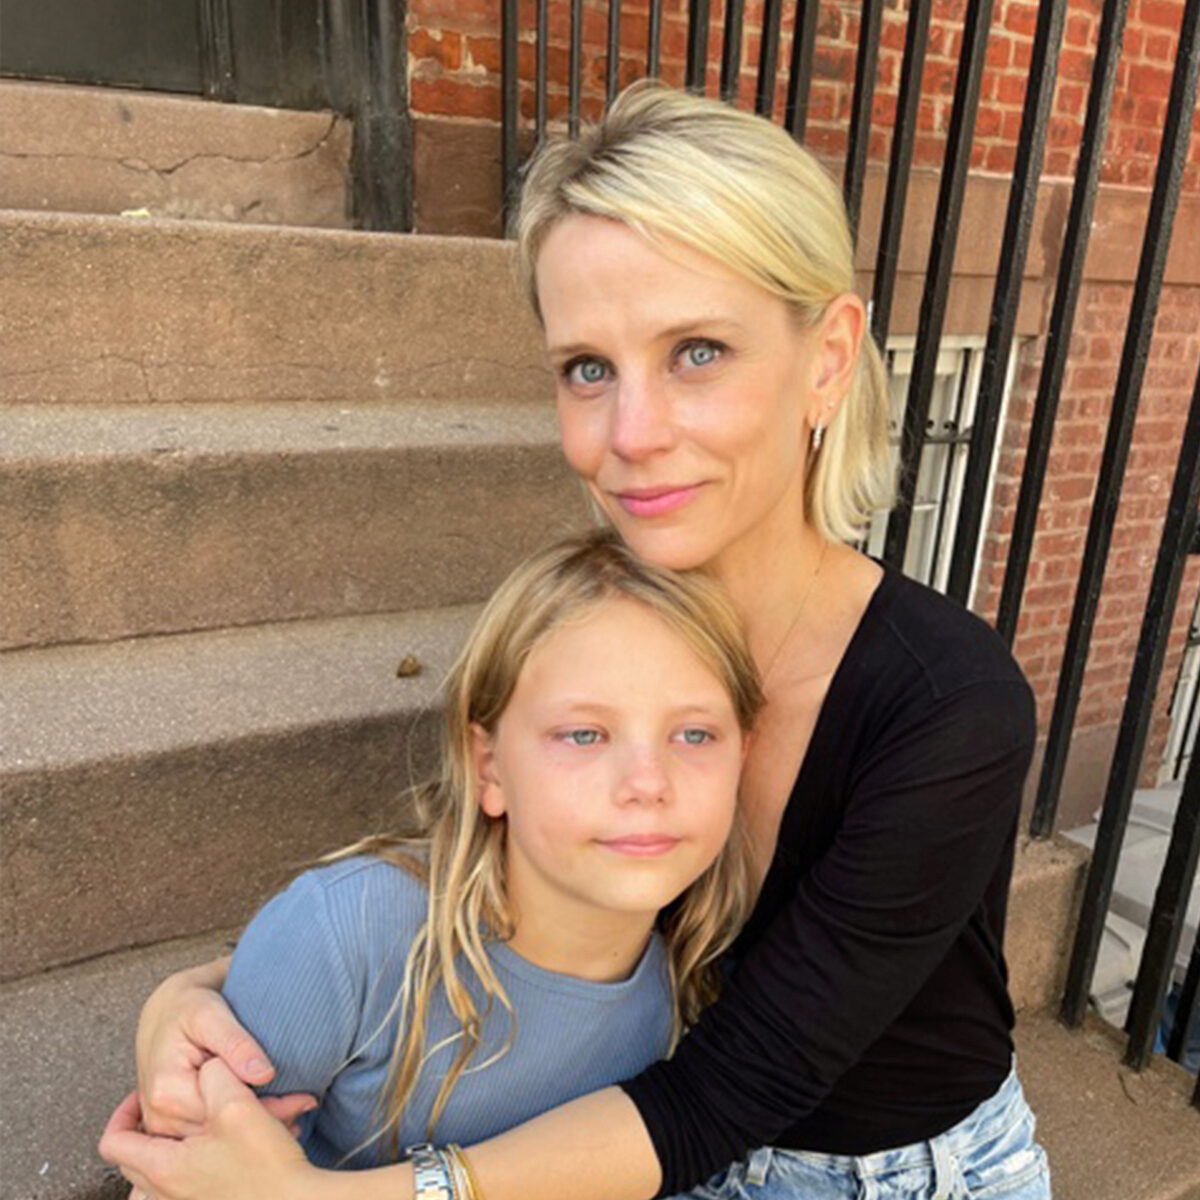 the author Jessica Harter with her daughter on a front stoop